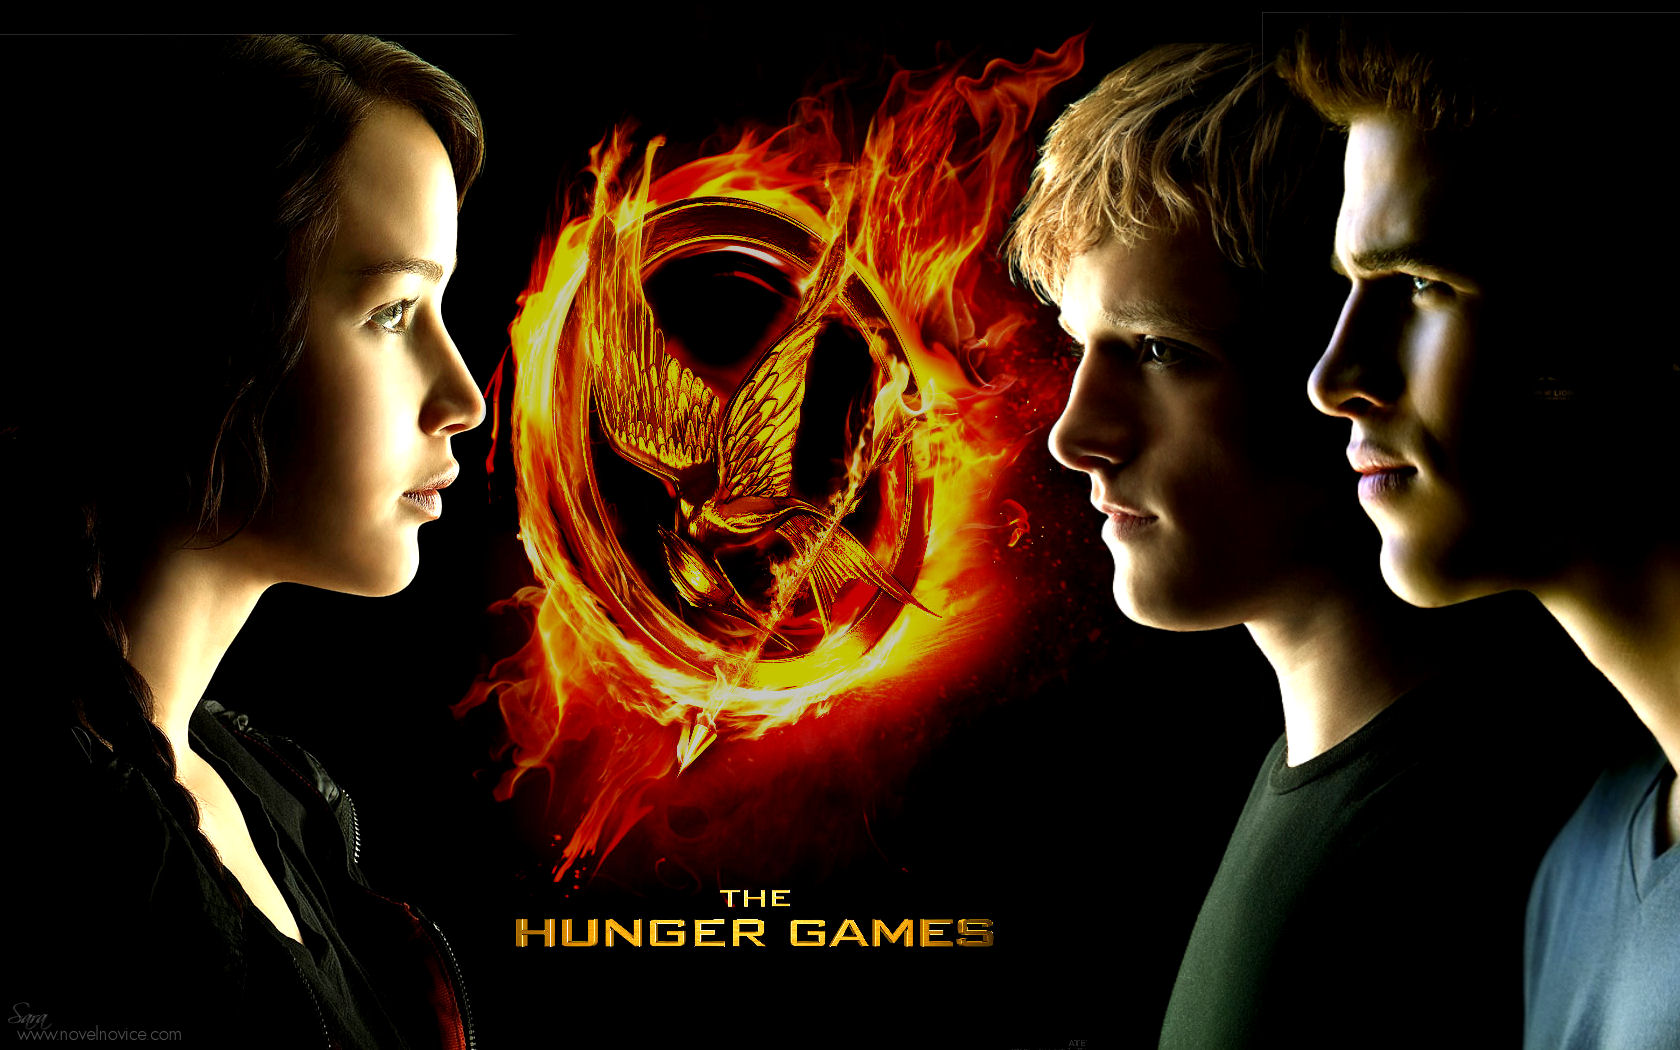 Things in The Hunger Games you only notice as an adult